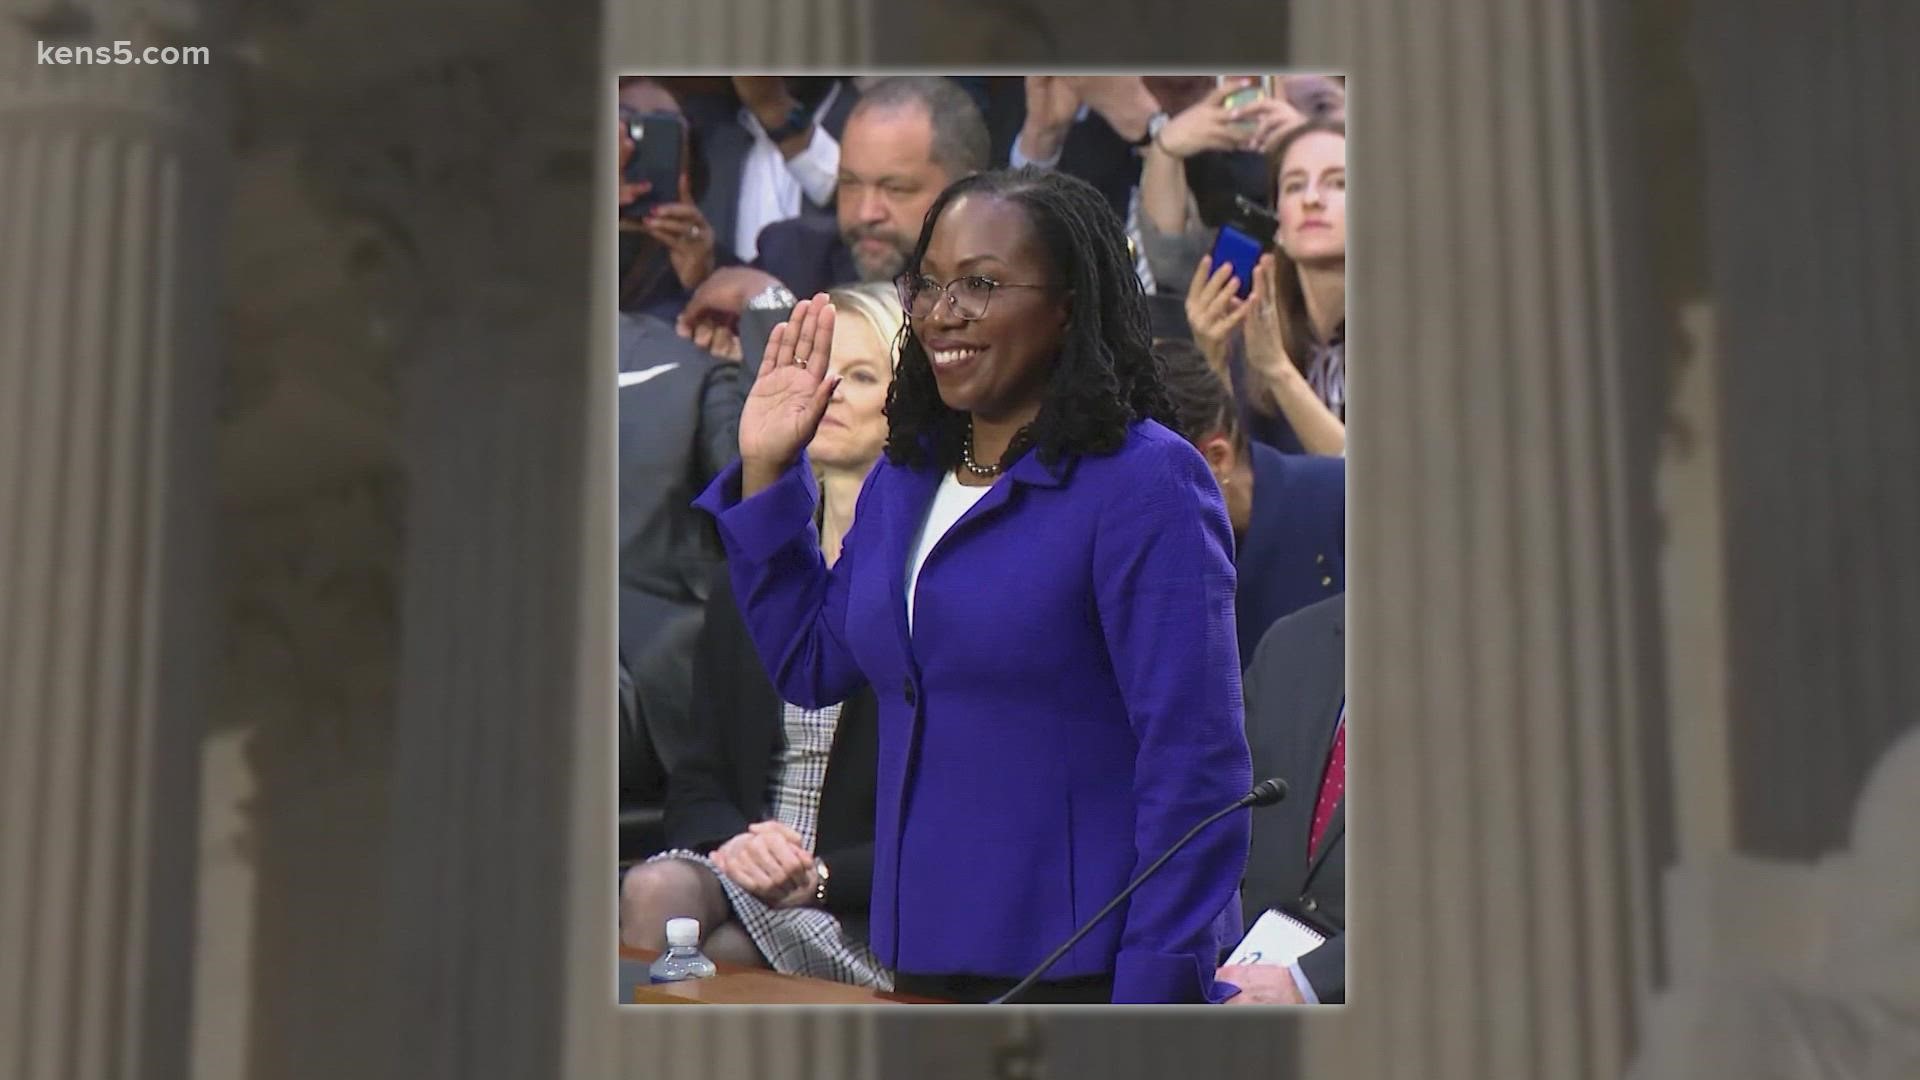 Judge Ketanji Brown Jackson could soon be the first Black woman to serve on the nation's highest court. Local leaders in San Antonio share why it's so impactful.